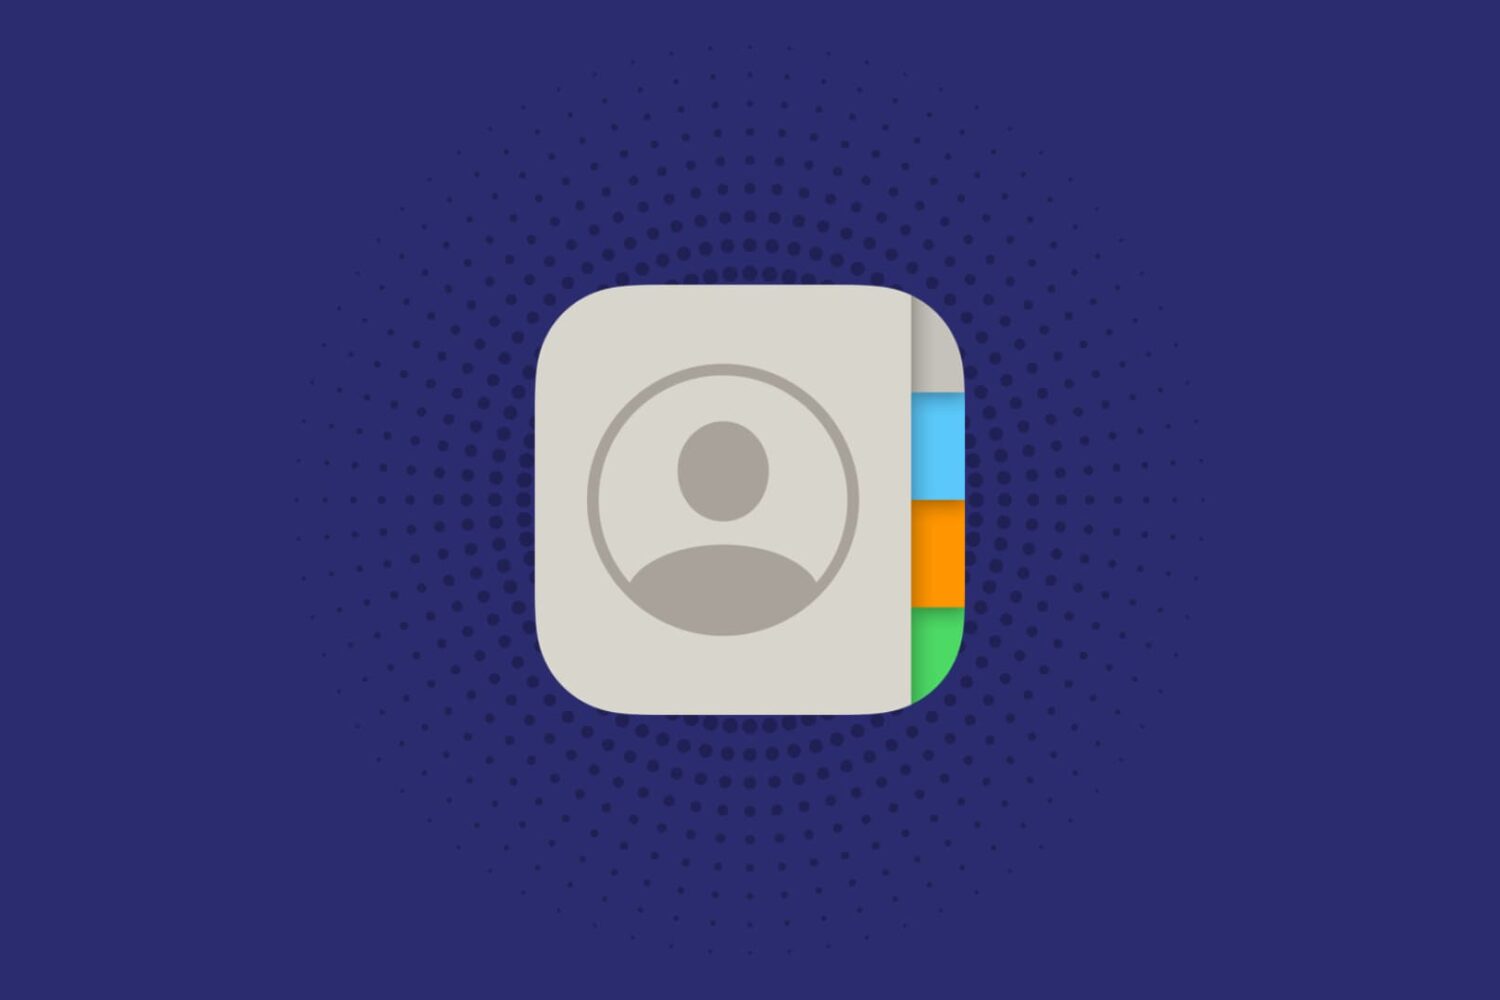 iPhone Contacts app icon on a solid violet blue background with little circle pattern in the background